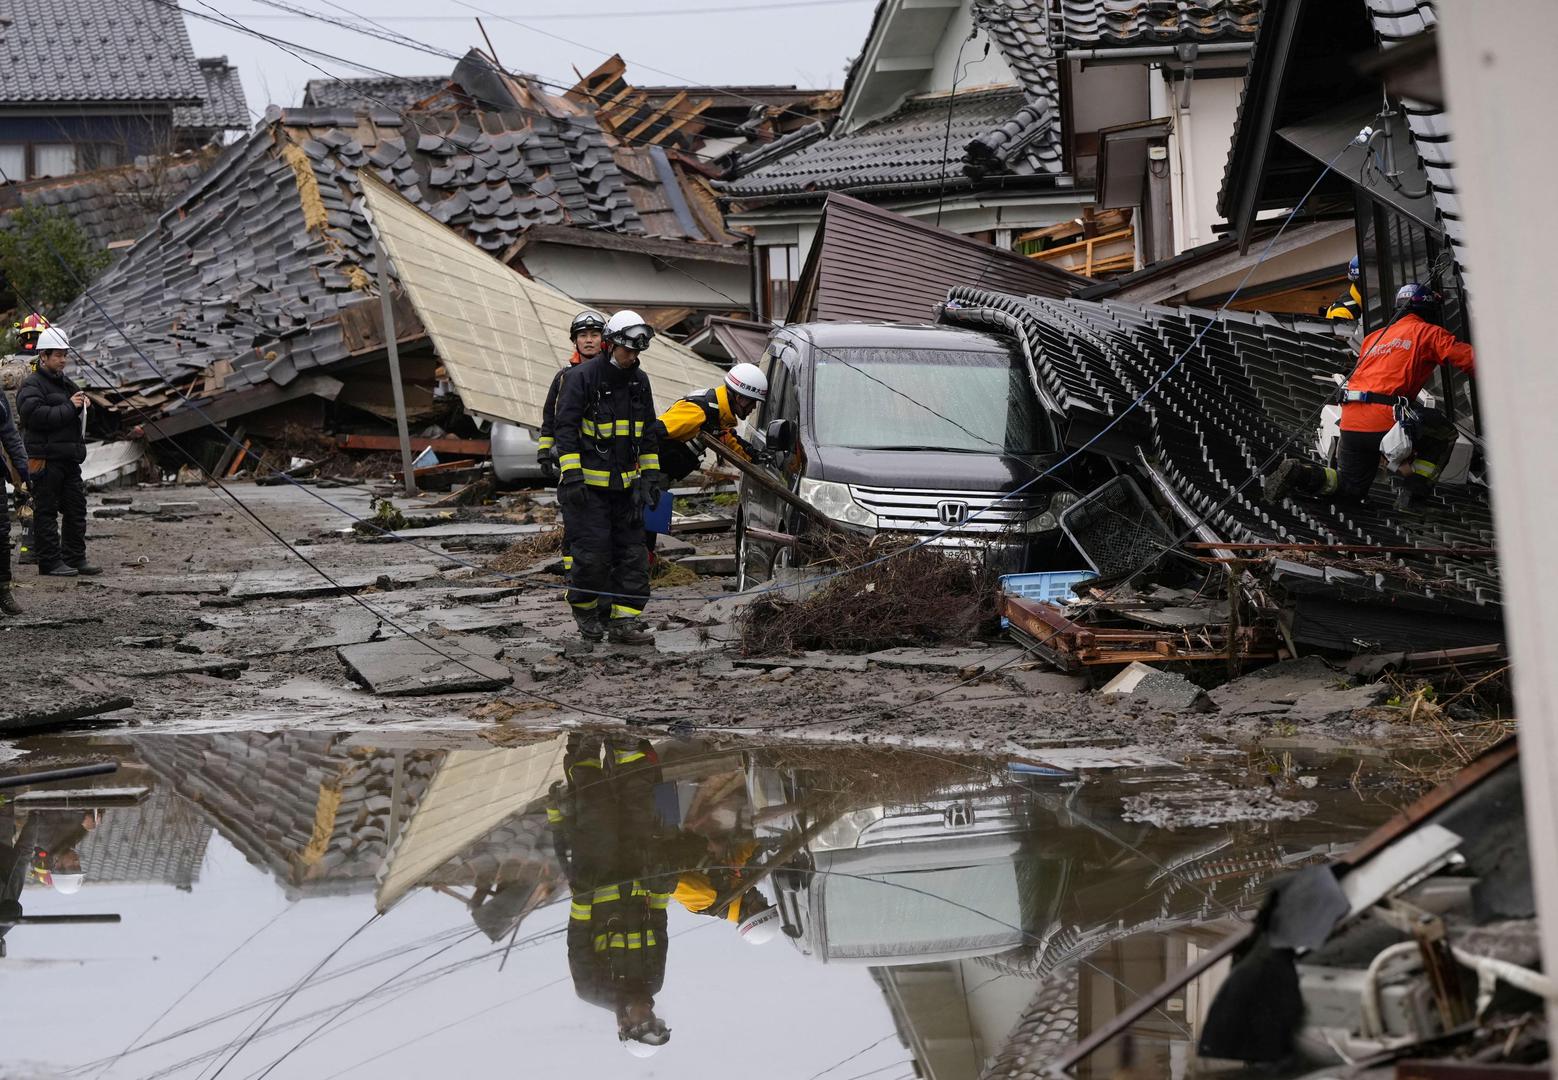 Firefighters and police officers conduct search and rescue operations at a tsunami-devastated residential area in Suzu, Ishikawa prefecture, Japan January 3, 2024, in this photo released by Kyodo. Mandatory credit Kyodo via REUTERS ATTENTION EDITORS - THIS IMAGE WAS PROVIDED BY A THIRD PARTY. MANDATORY CREDIT. JAPAN OUT. NO COMMERCIAL OR EDITORIAL SALES IN JAPAN   Mandatory credit Kyodo/via REUTERS   ATTENTION EDITORS - THIS IMAGE HAS BEEN SUPPLIED BY A THIRD PARTY. MANDATORY CREDIT. JAPAN OUT. NO COMMERCIAL OR EDITORIAL SALES IN JAPAN. Photo: KYODO/REUTERS